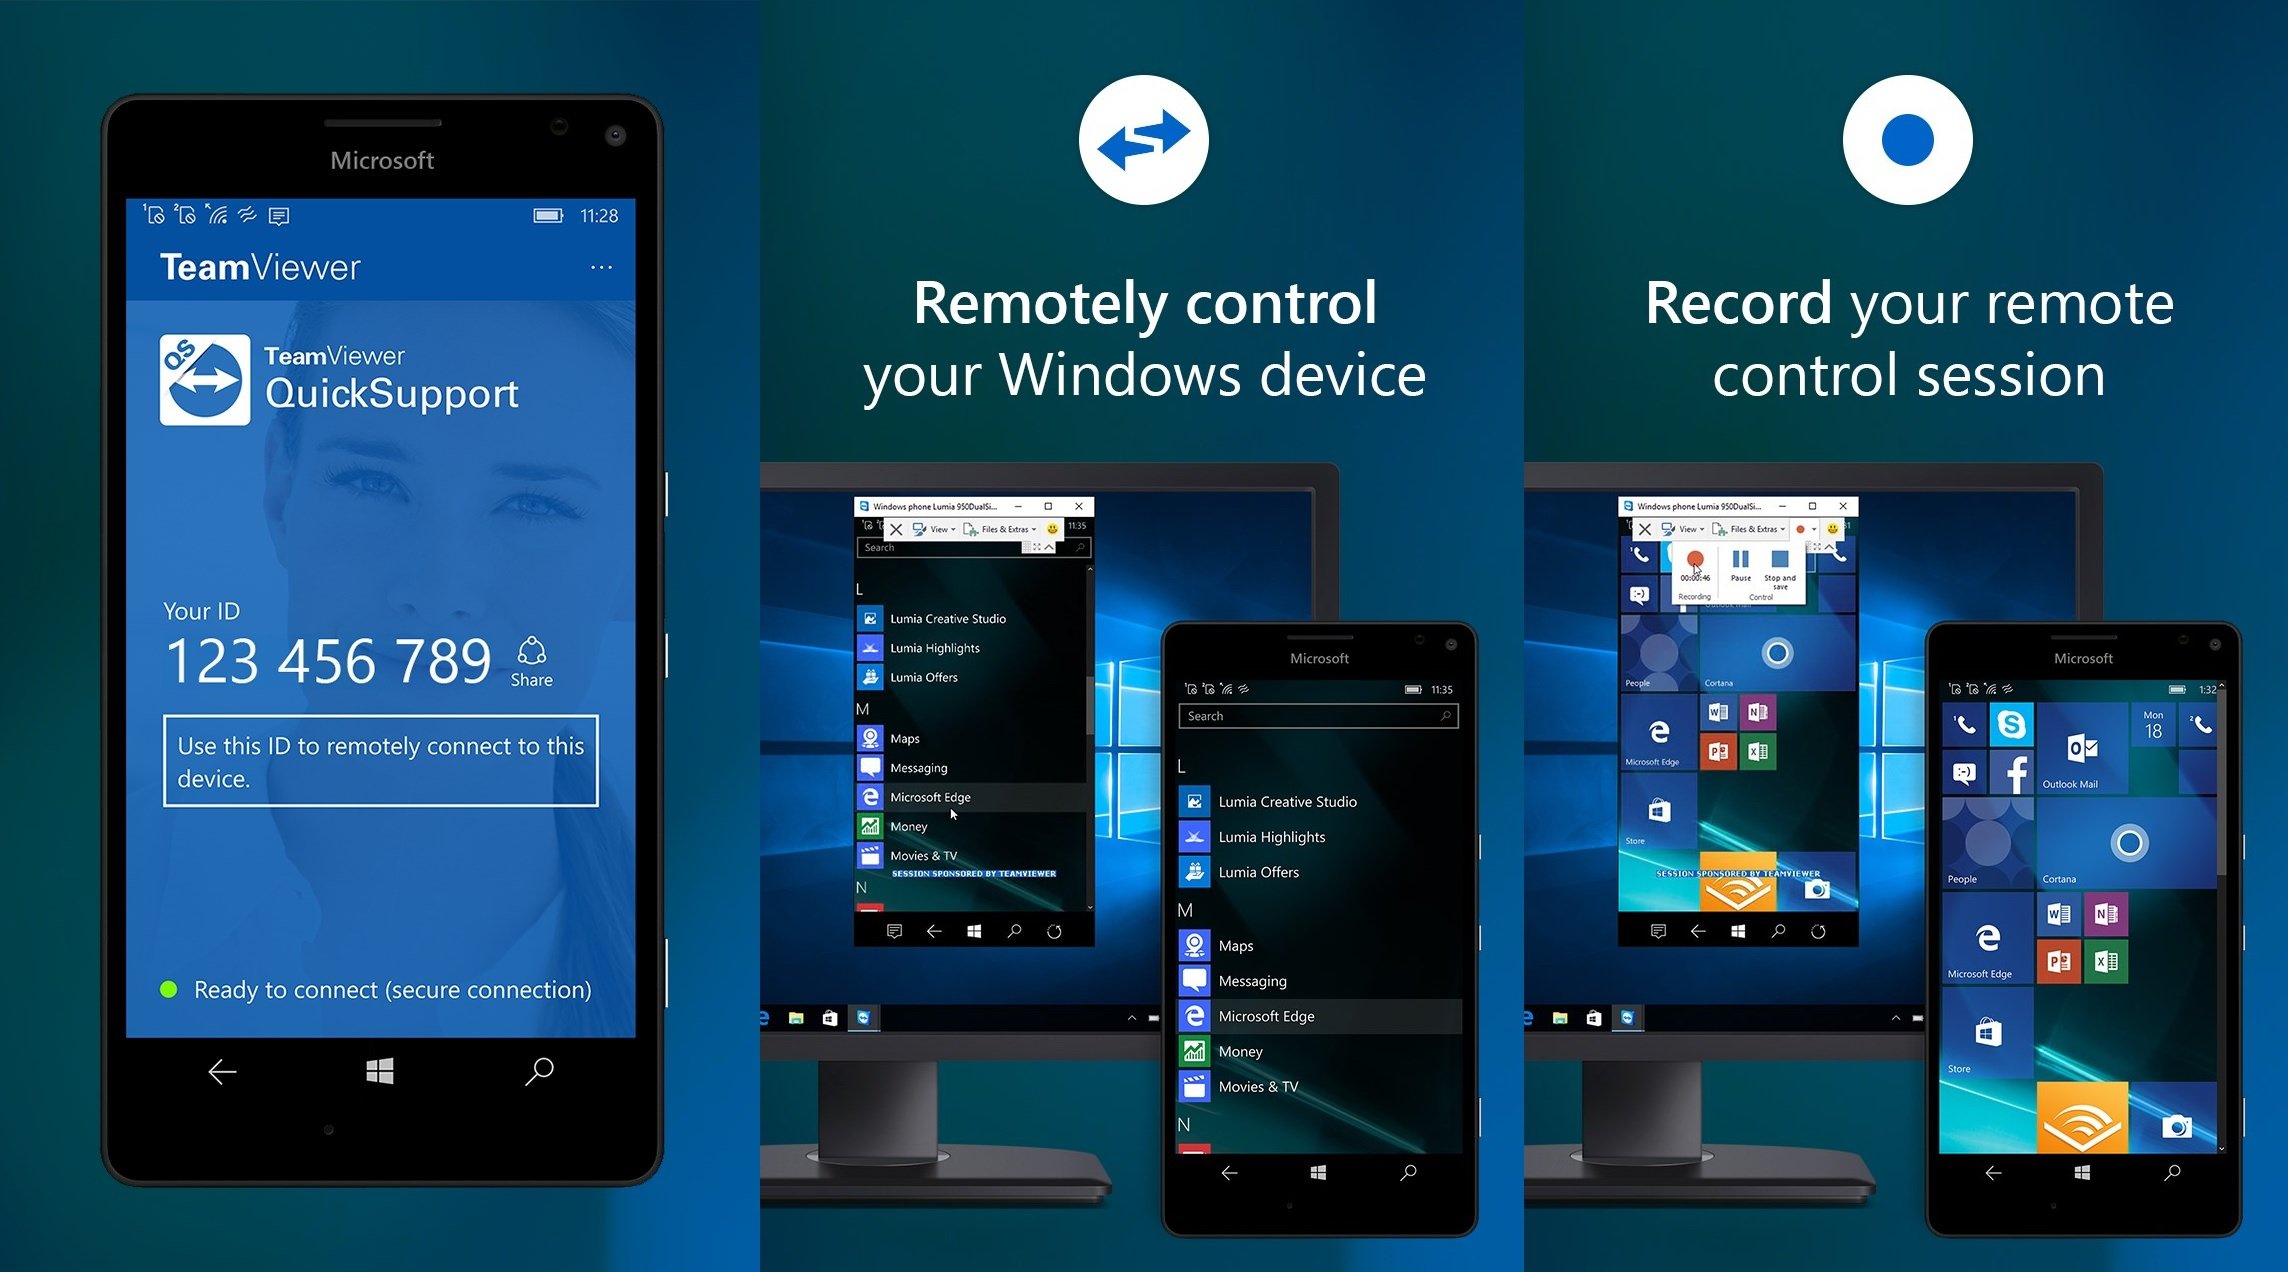 TeamViewer QuickSupport app now allows you to remotely control your Windows mobile device